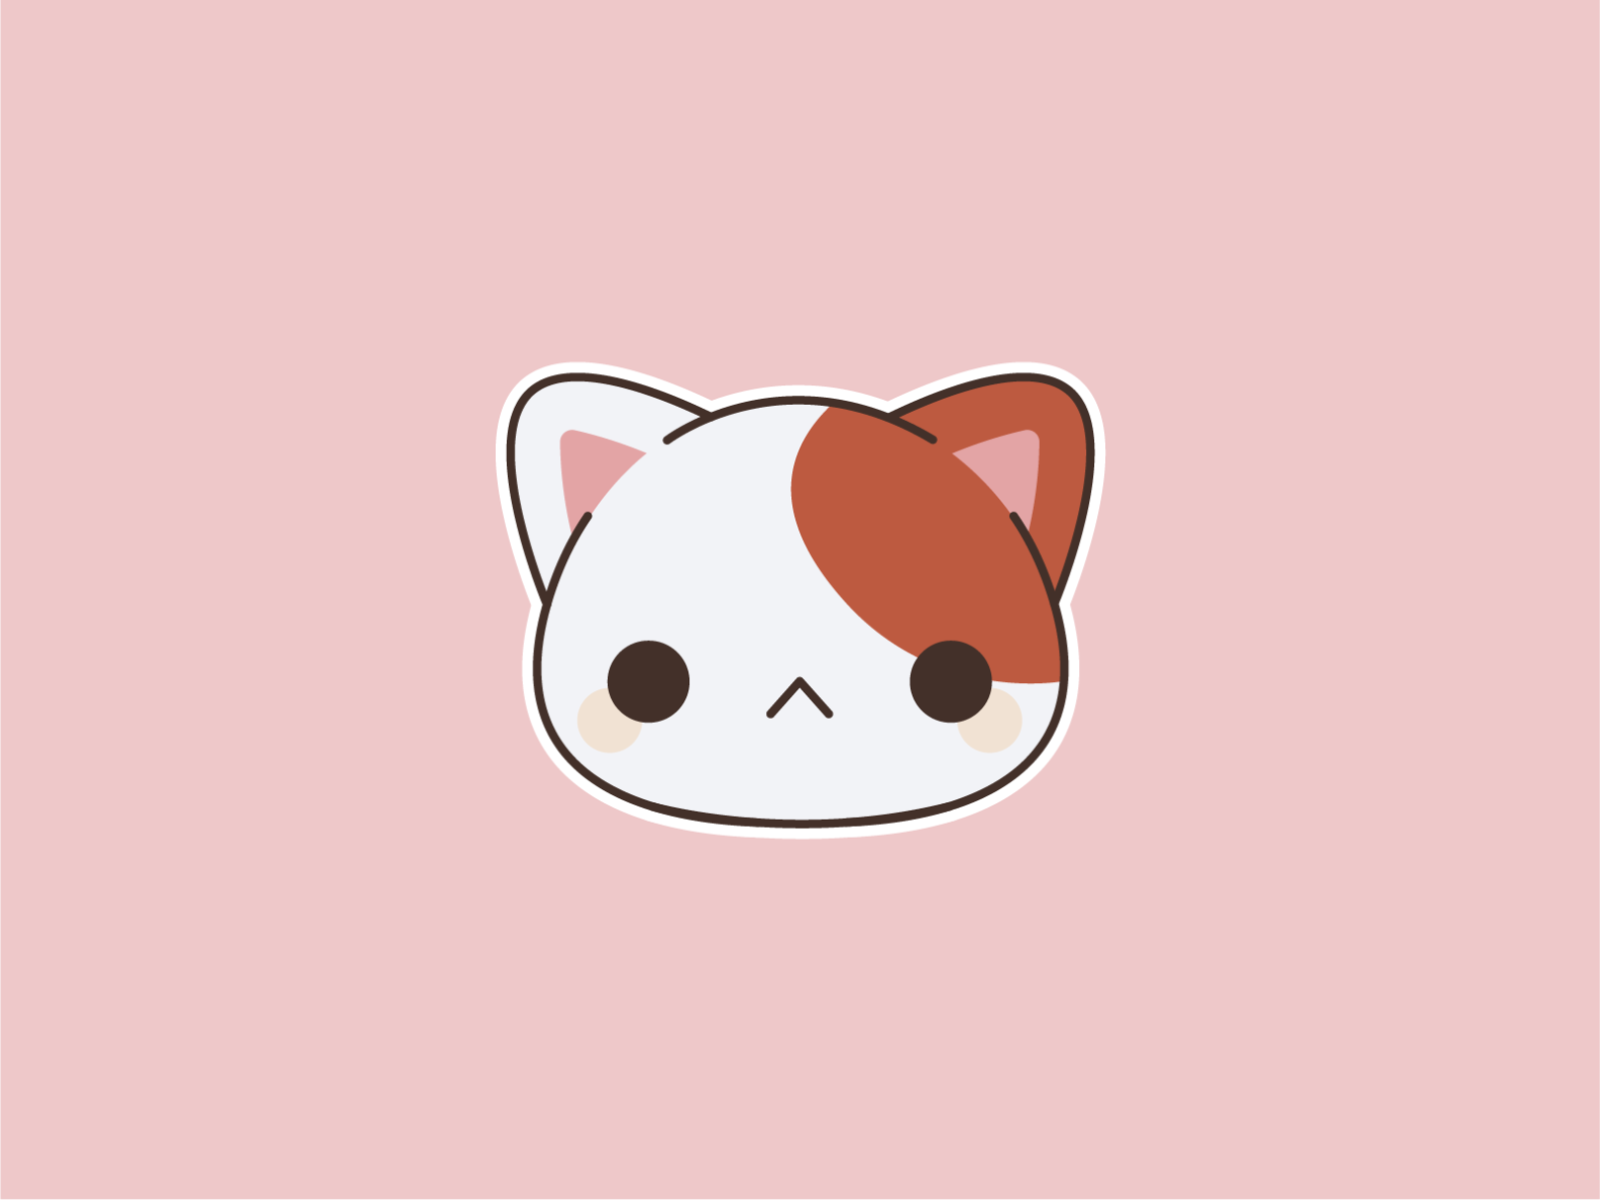 prompthunt cute kawaii anime chibi cat pinterest chibi cat cute painted  with acryl marker colourful vector graphic style